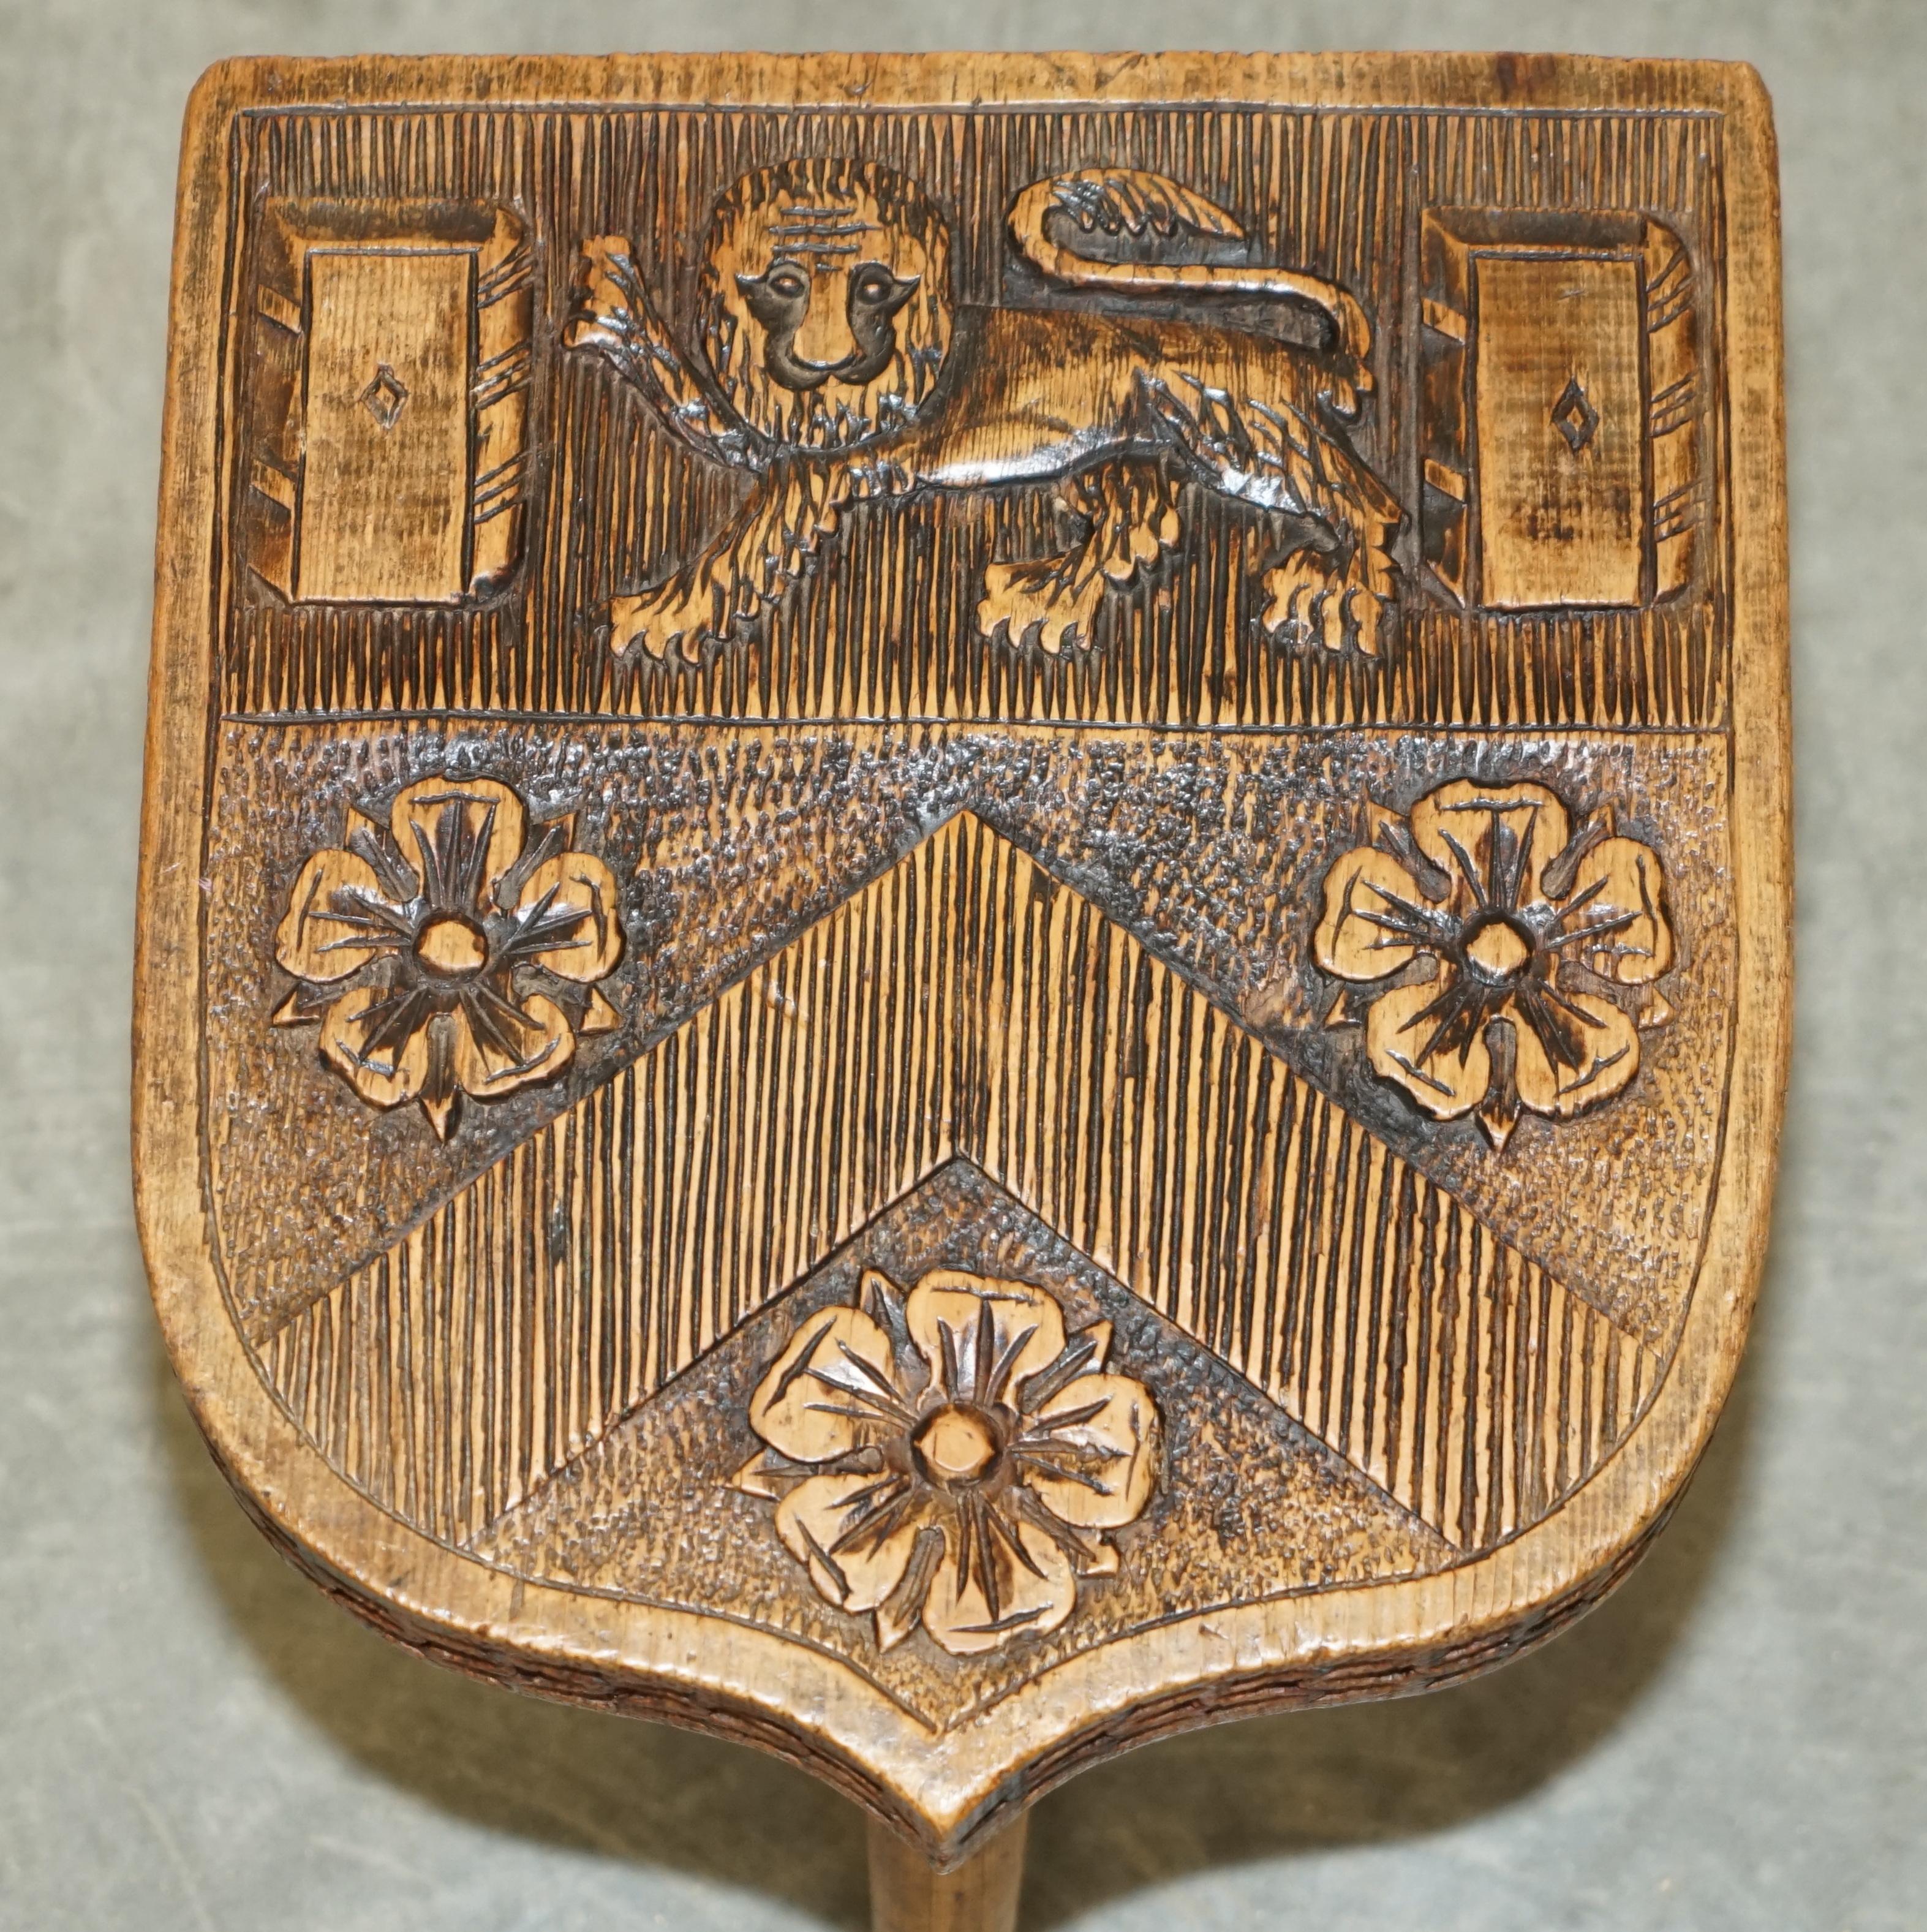 Antique 1575 Trinity College Cambridge Coat of Arms Armorial Crest Side Table For Sale 1